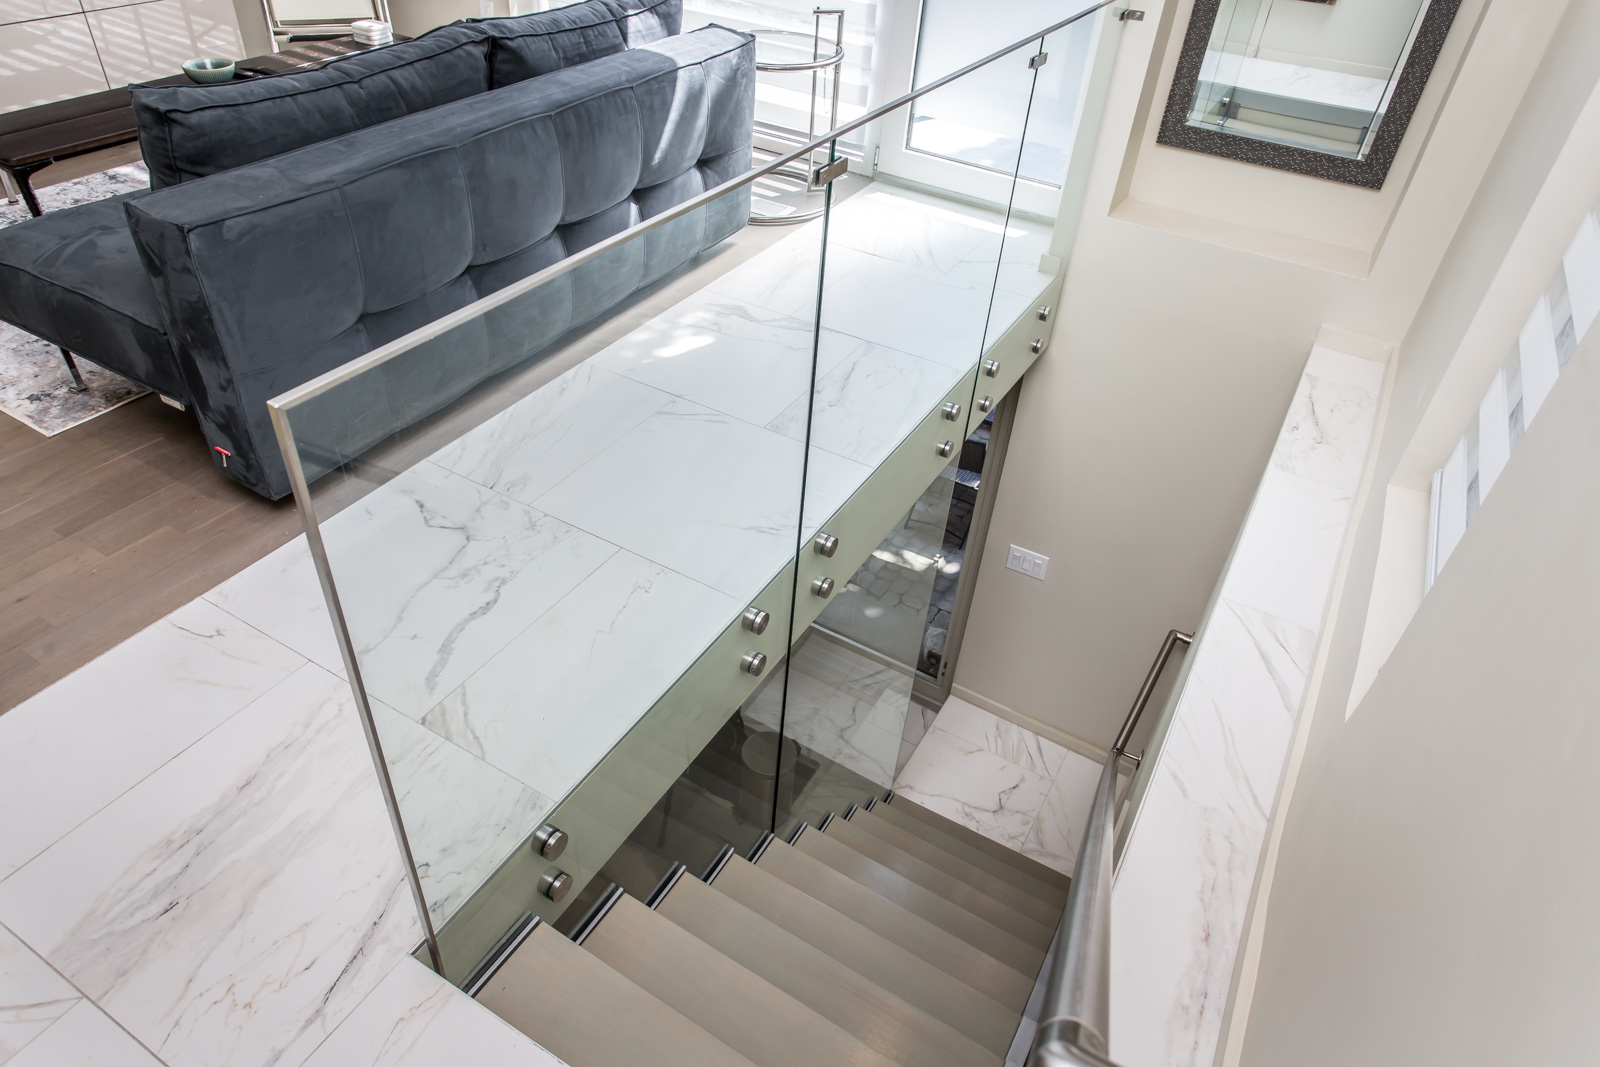 A rather striking view of the glass staircase.